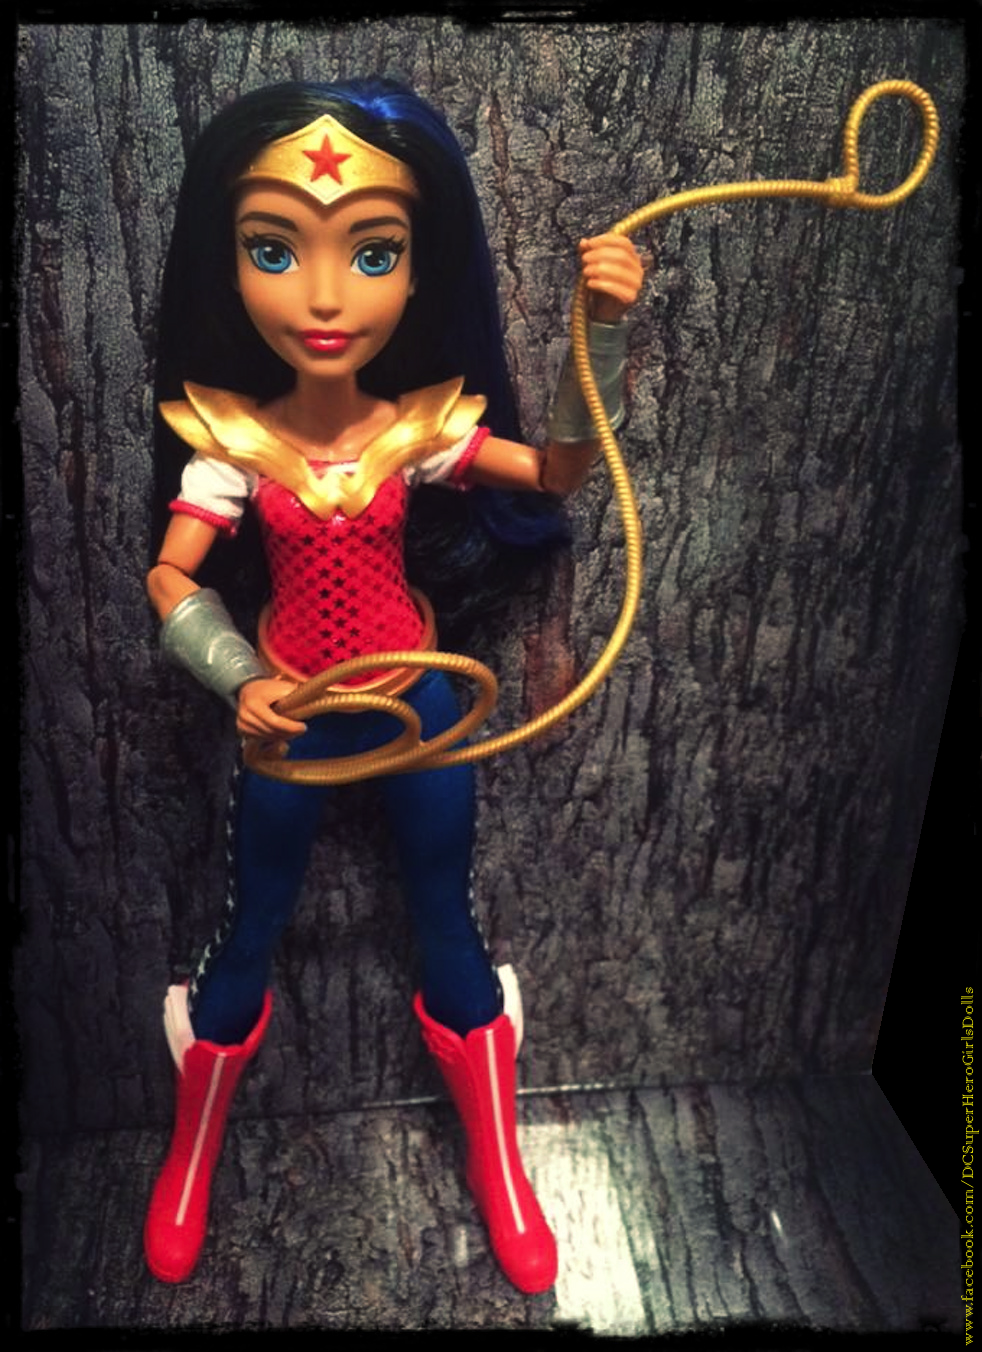 DC Super Hero Girls&rsquo; Wonder Woman™!Learn about her: Wondy is a true leader who is courageous, competent and competitive. All the girls at Super Hero High look up to her but she still has a lot to learn about life away from her home on Paradise Island. Good thing she has plenty of friends to show her the ropes.Super Powers: Super Strength, Flight, Nearly Invincible, Super Athleticism.